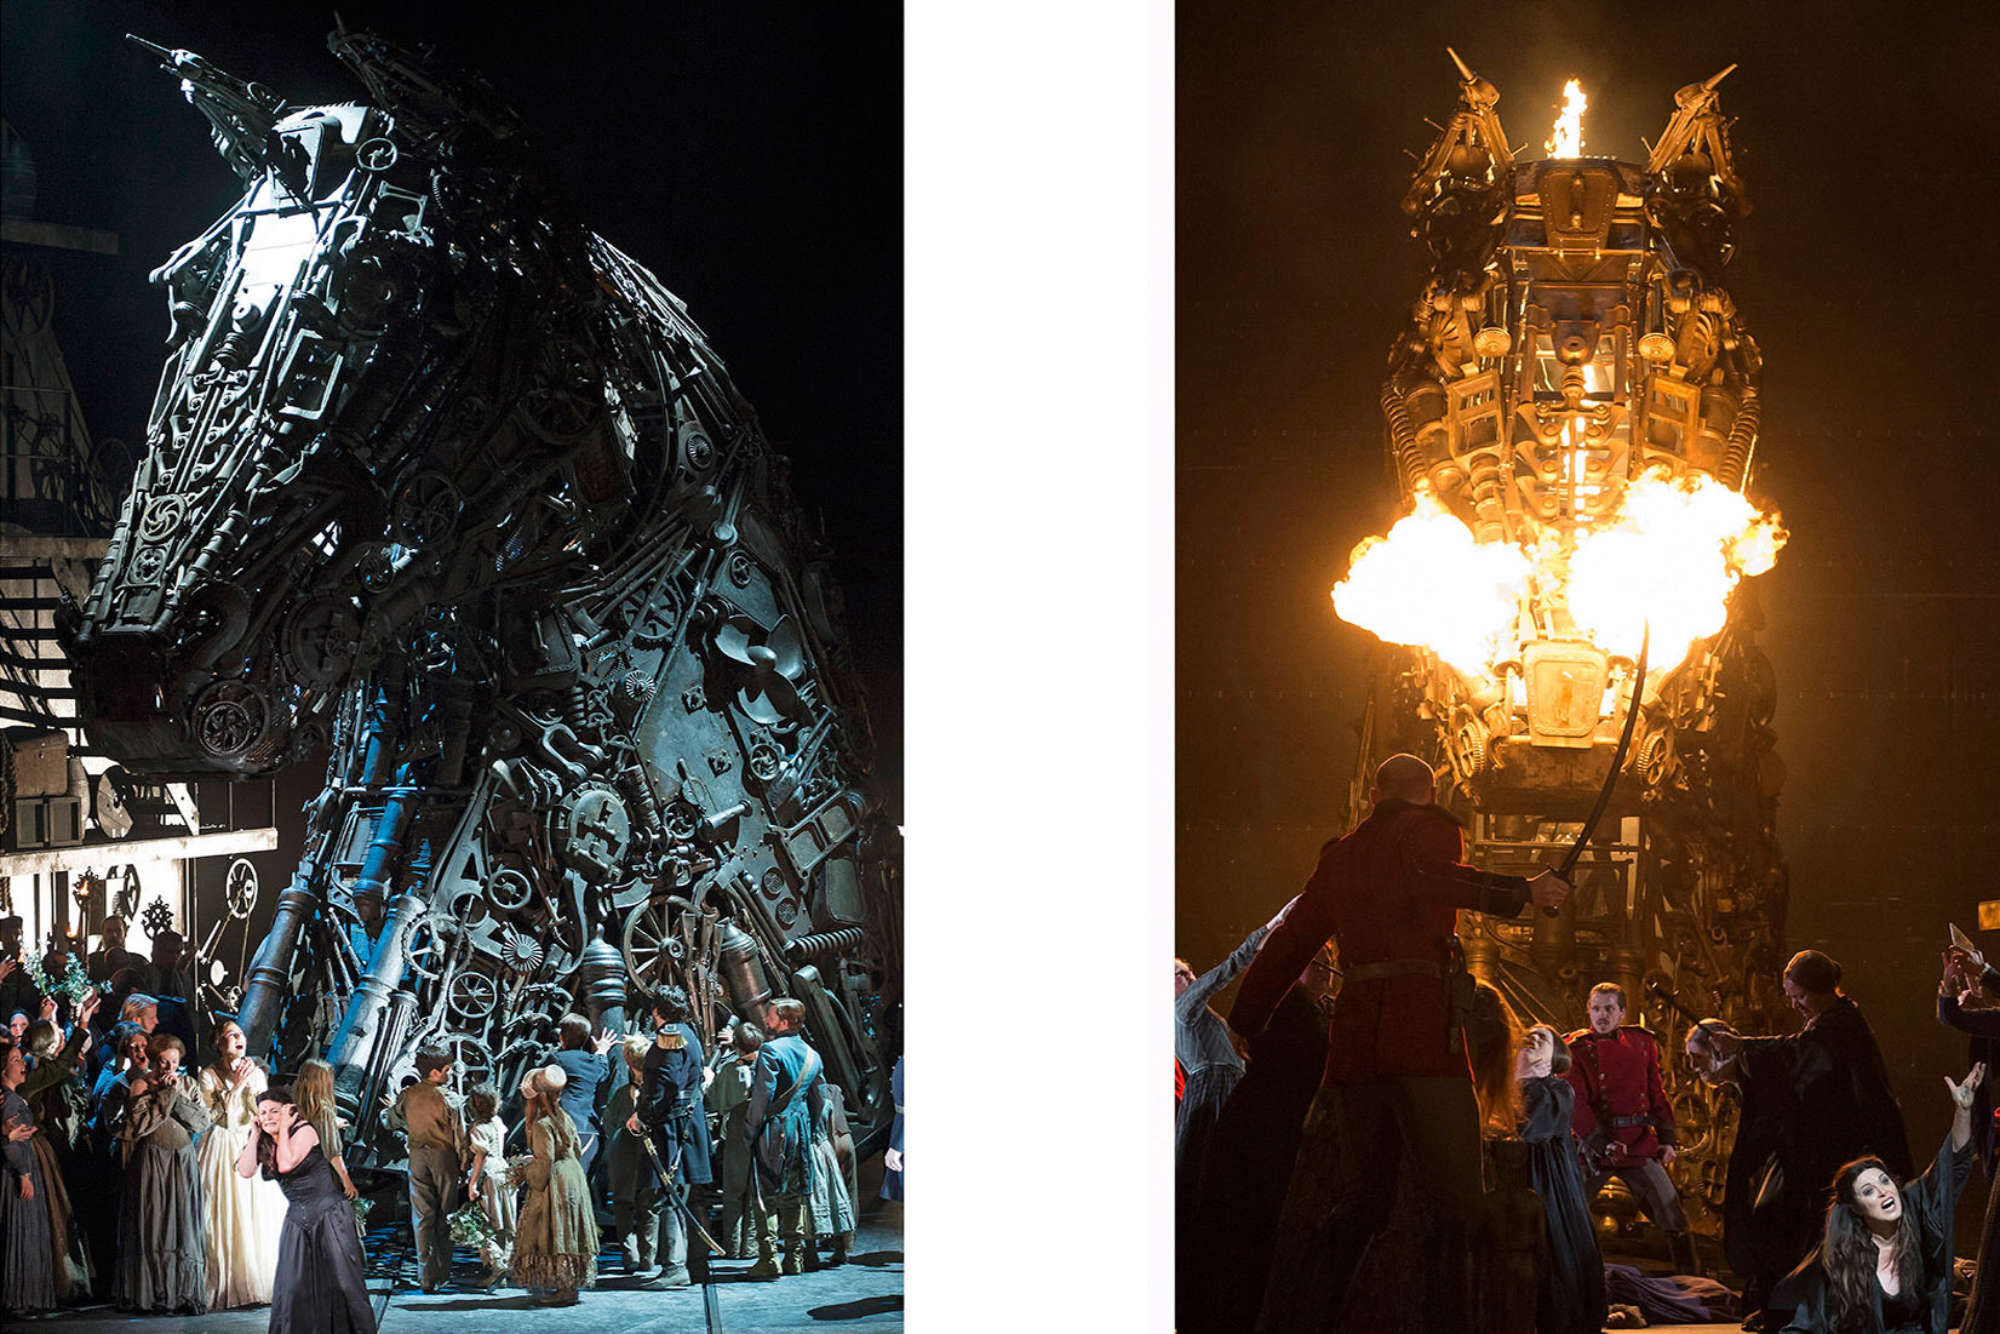 Les Troyens: Es Devlin on designing for The Royal Opera 